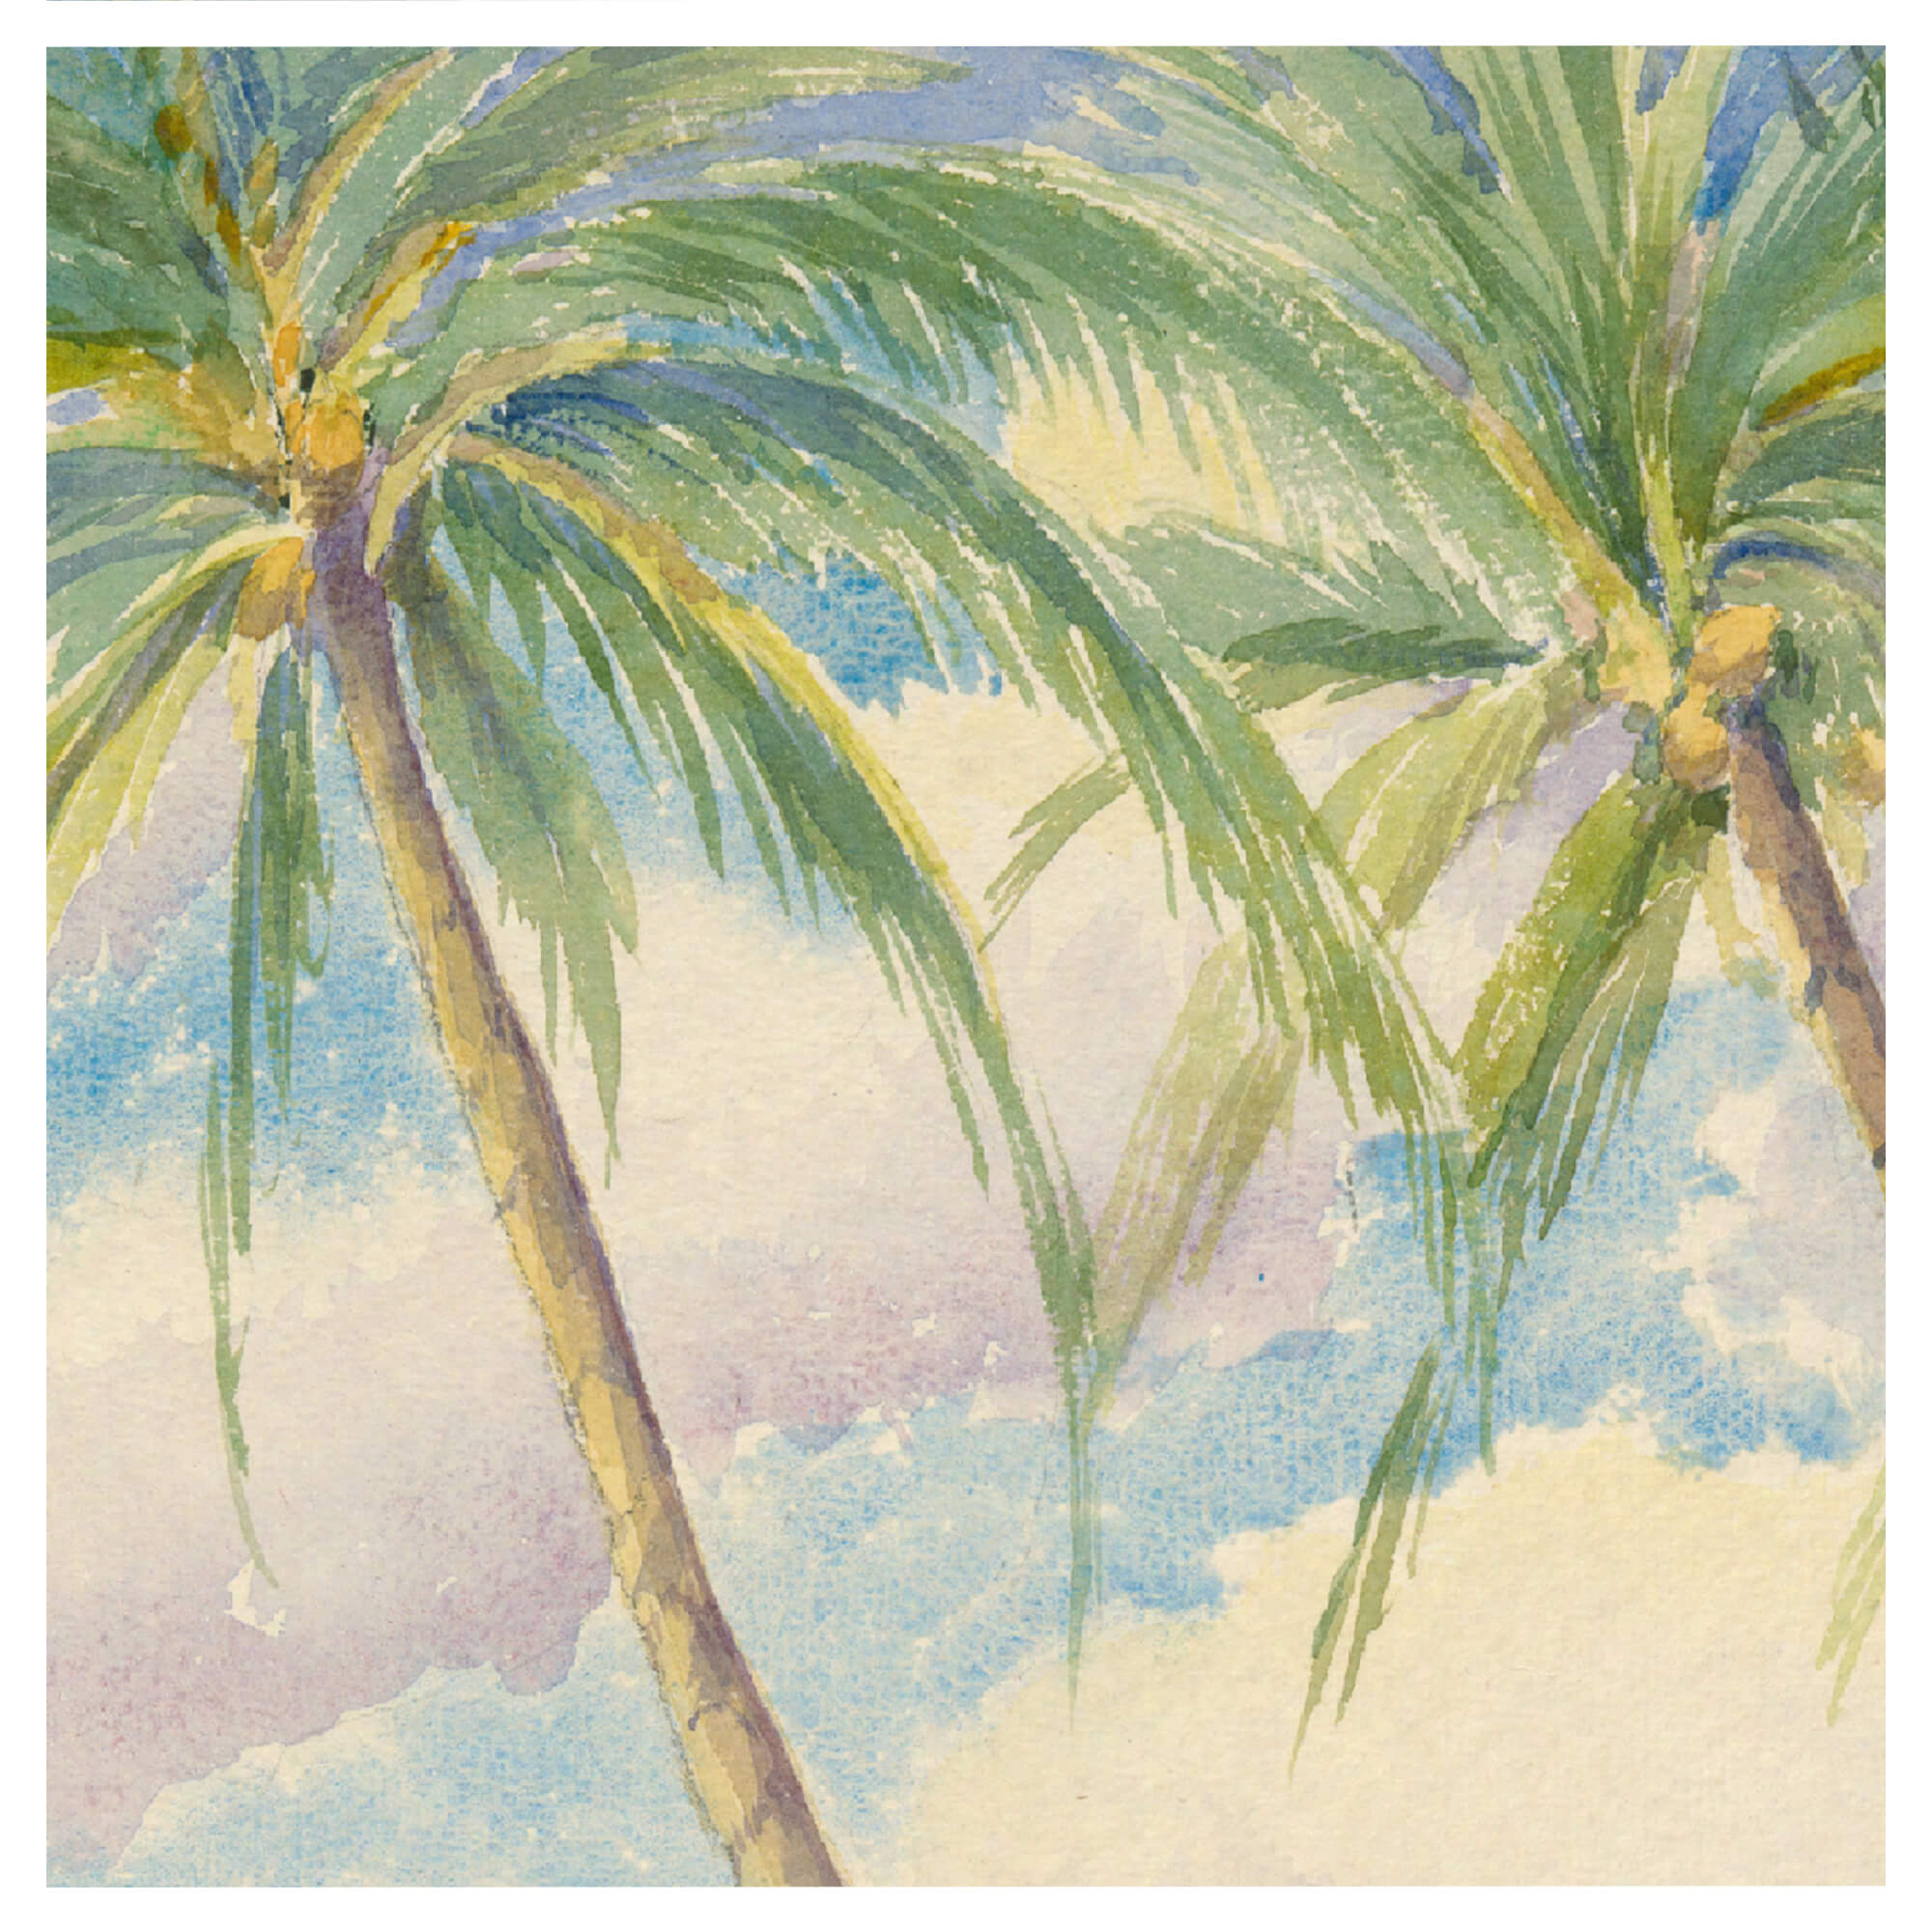 Coconut trees with purple and blue-hued sky